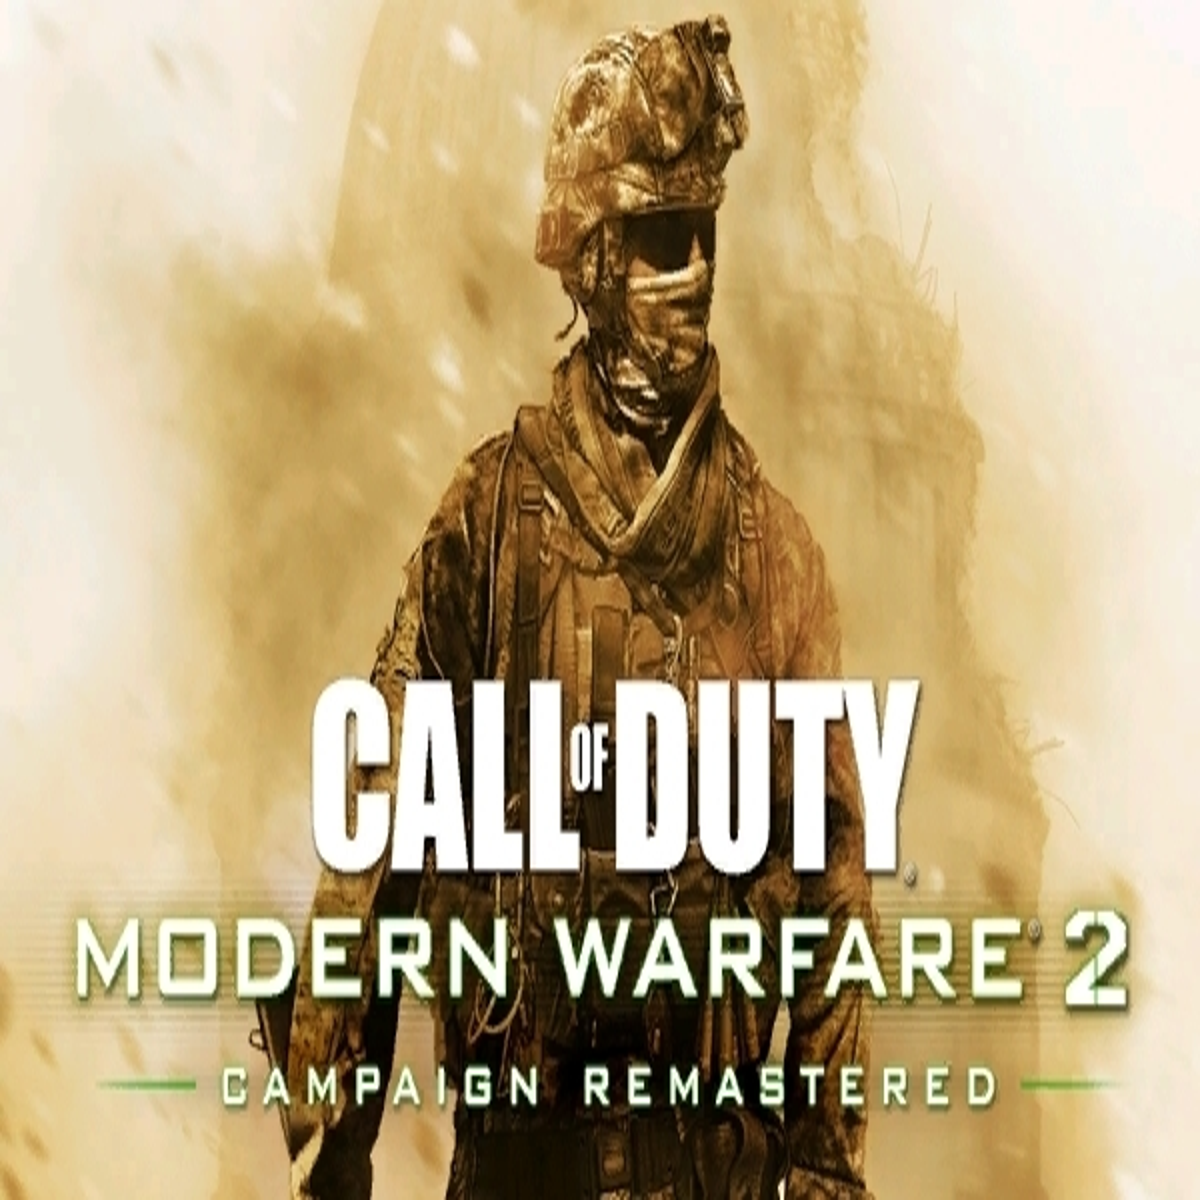 Call of Duty: Modern Warfare 2's remastered campaign is out now - Polygon